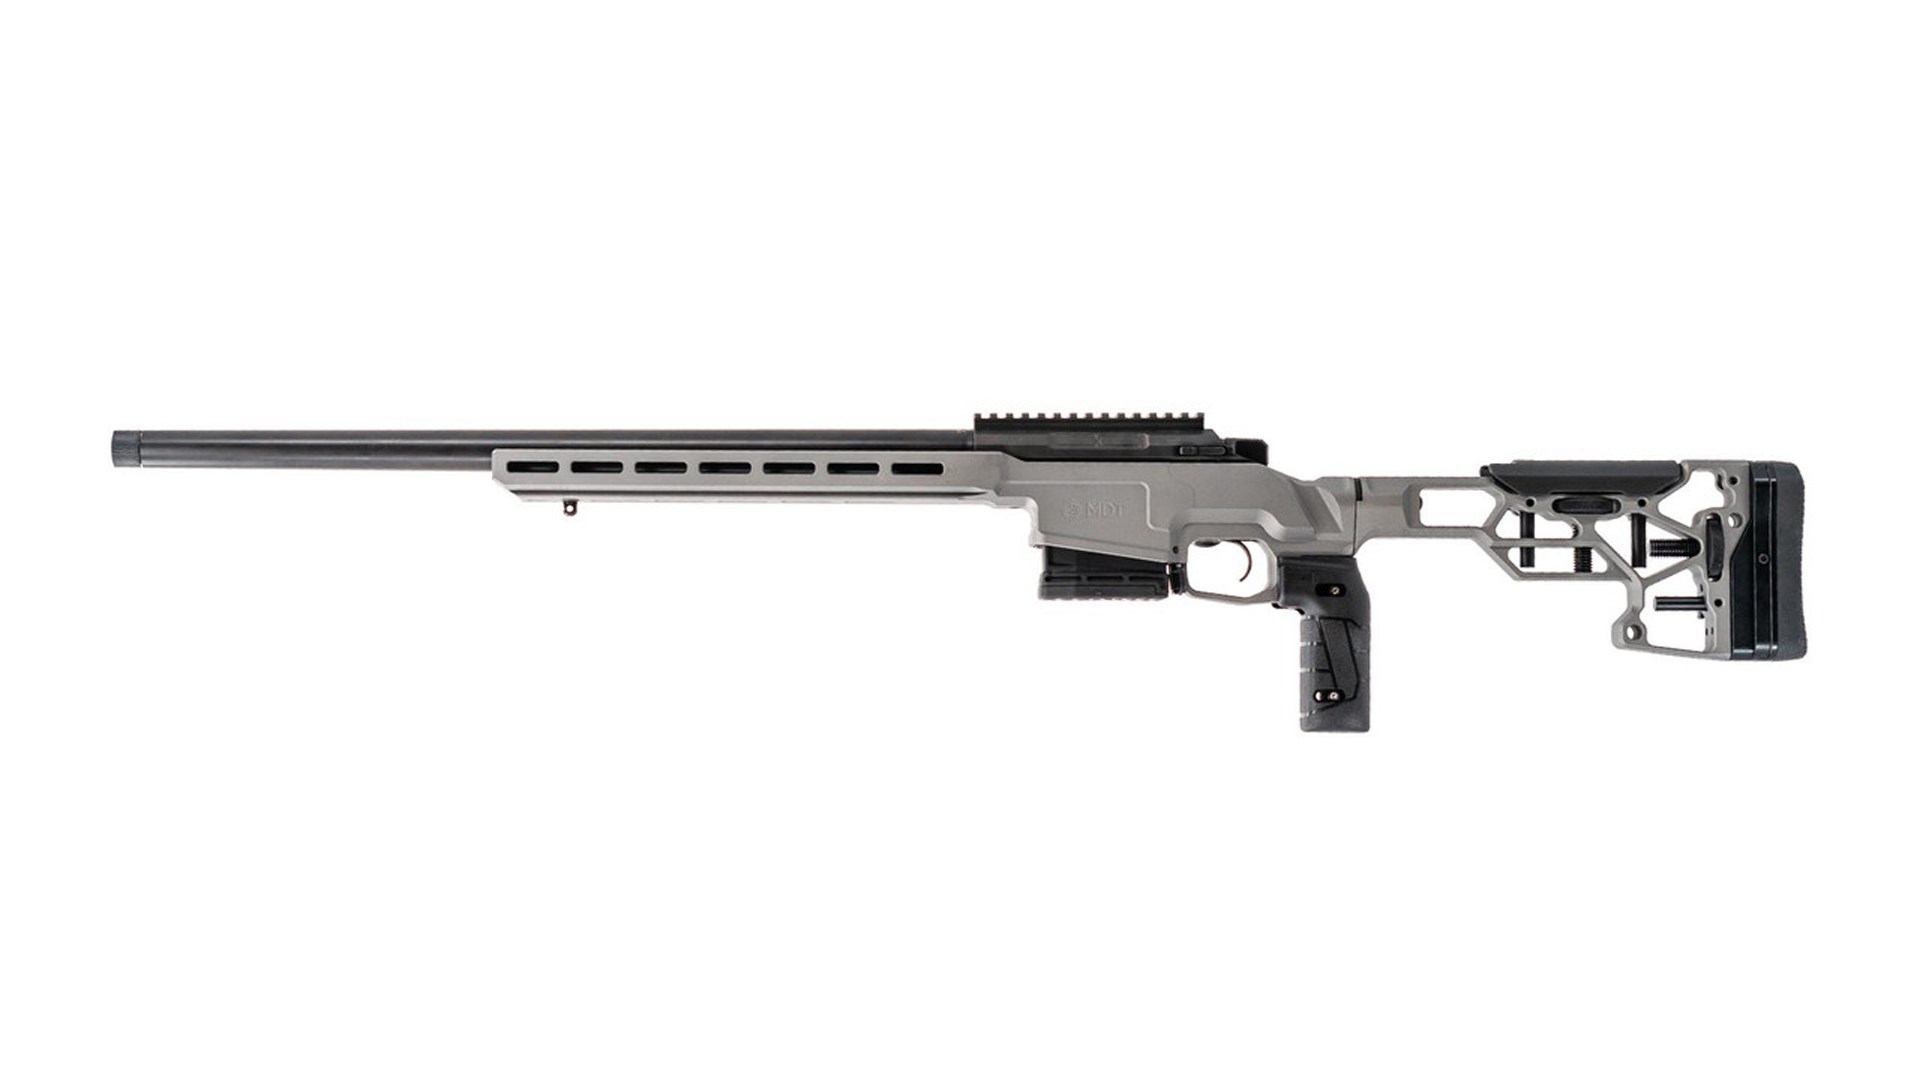 Left side of the Faxon Firearms FX7 bolt-action rifle.